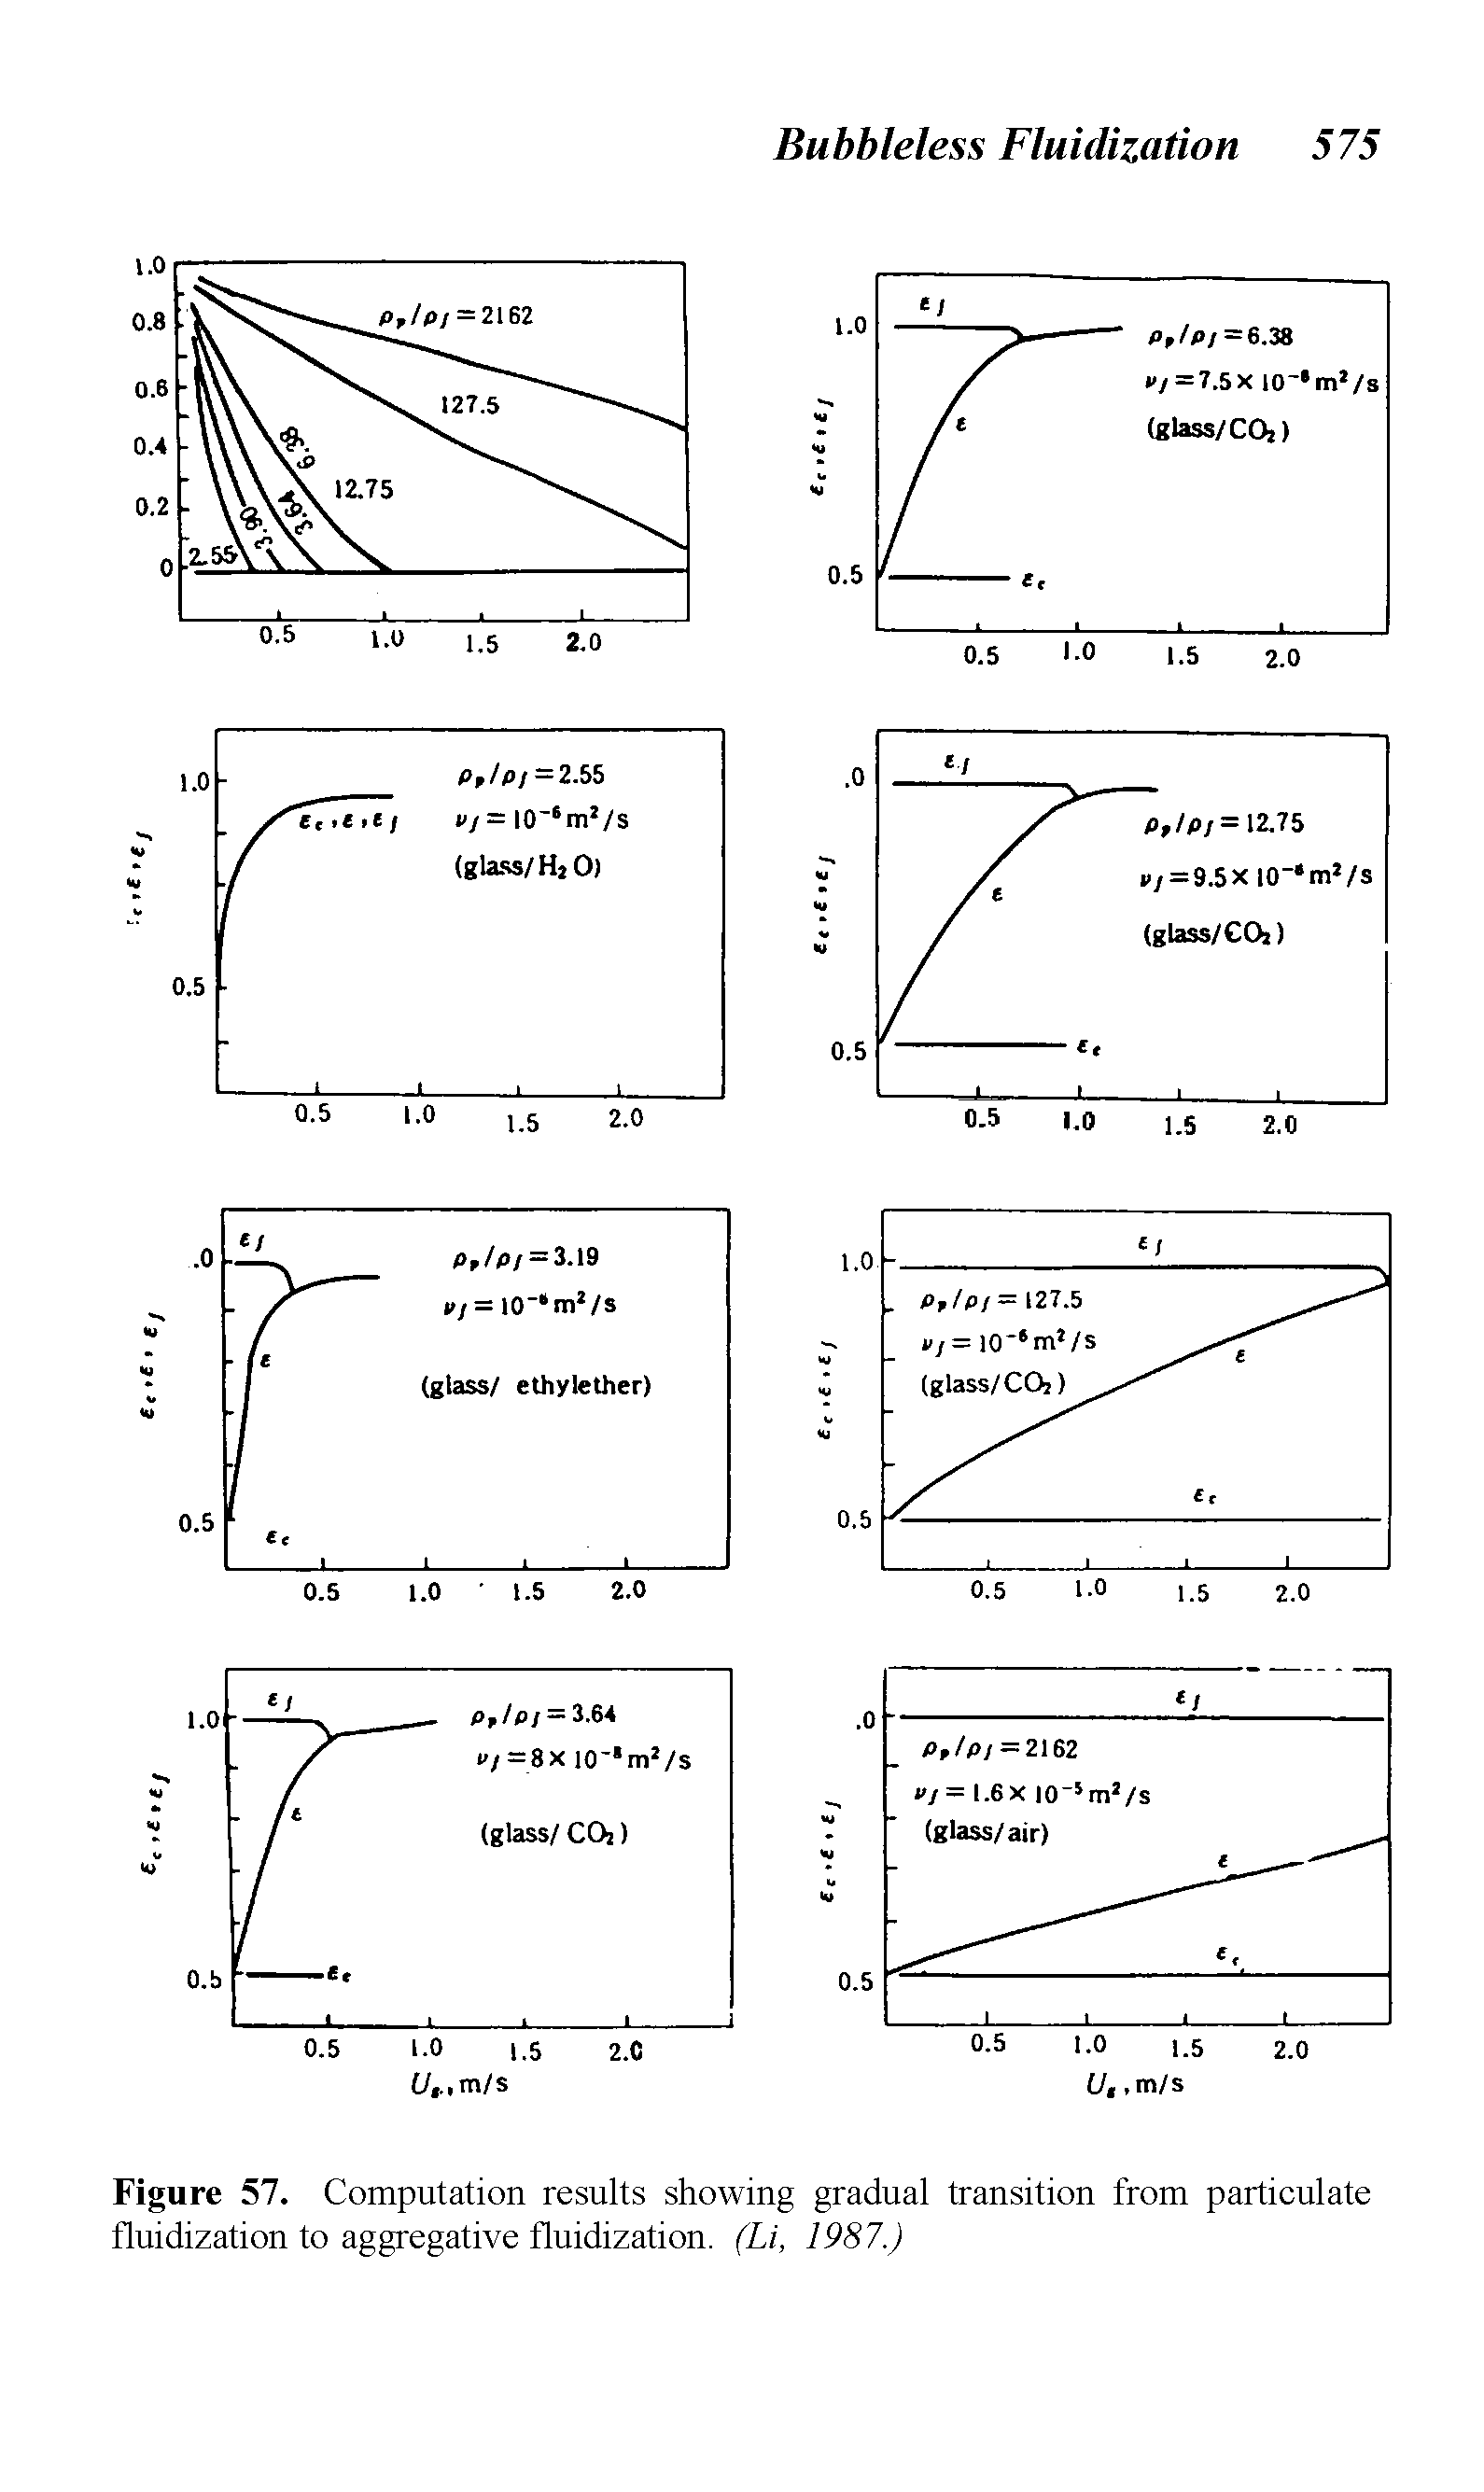 Figure 57. Computation results showing gradual transition from particulate fluidization to aggregative fluidization. (Li, 1987.)...